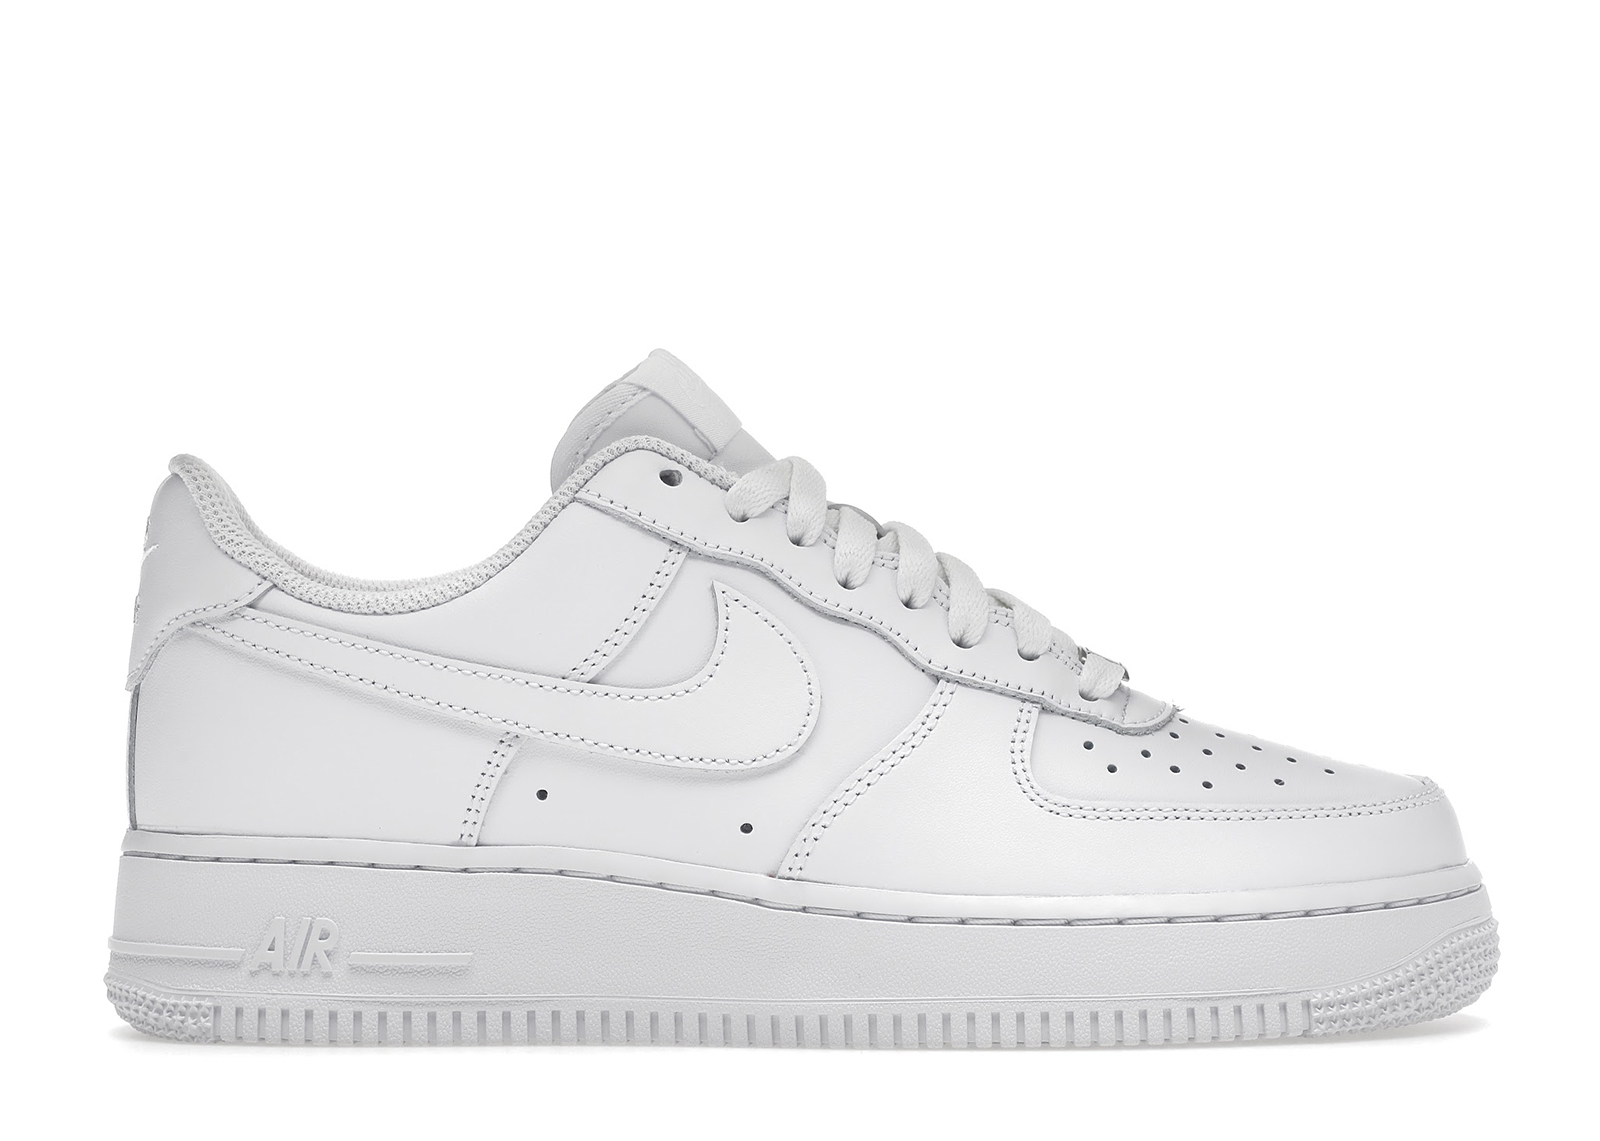 NIKE AIR FORCE 1 LOW WHITE 28.0cm